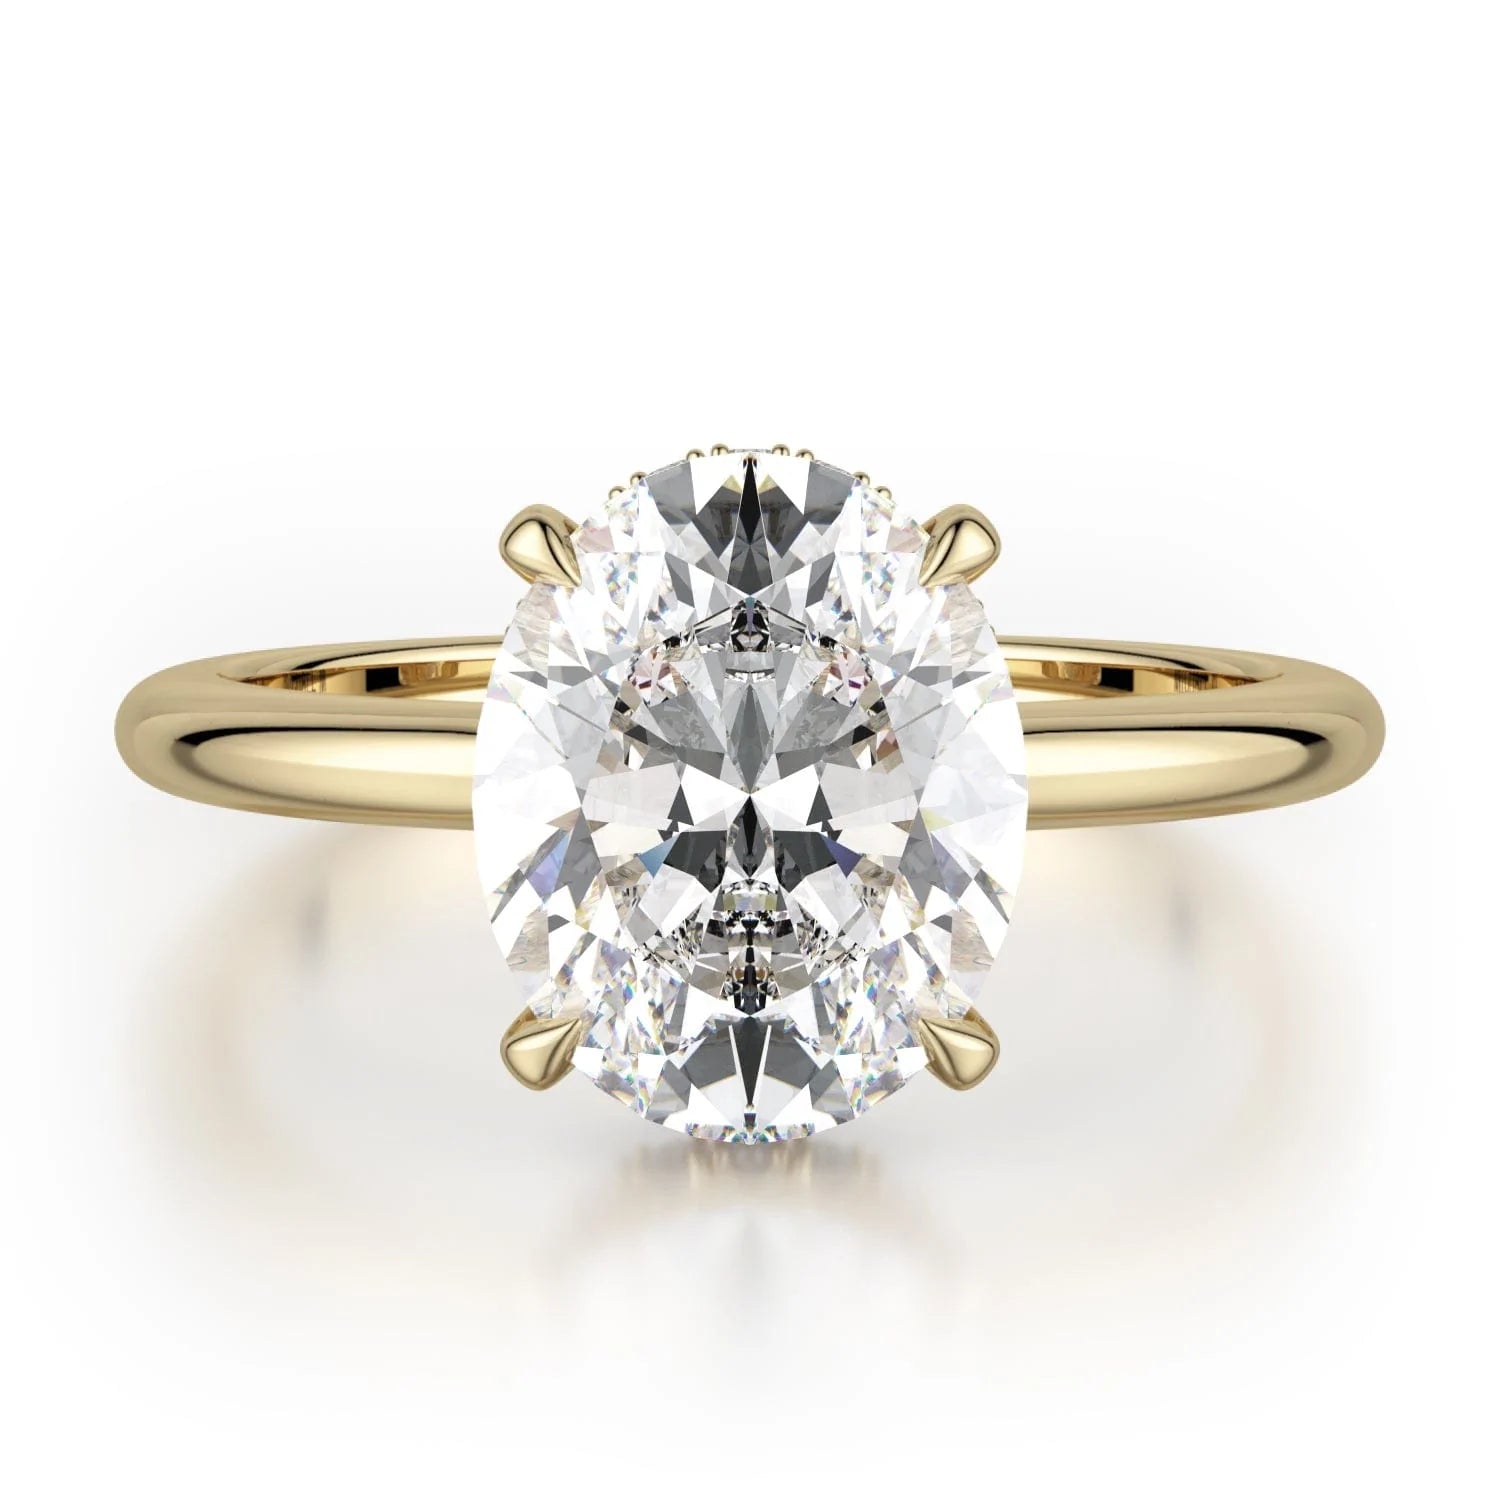 MICHAEL M Engagement Rings 18K Yellow Gold CROWN R750-3 Oval-Cut Diamond Solitaire R750-3YG